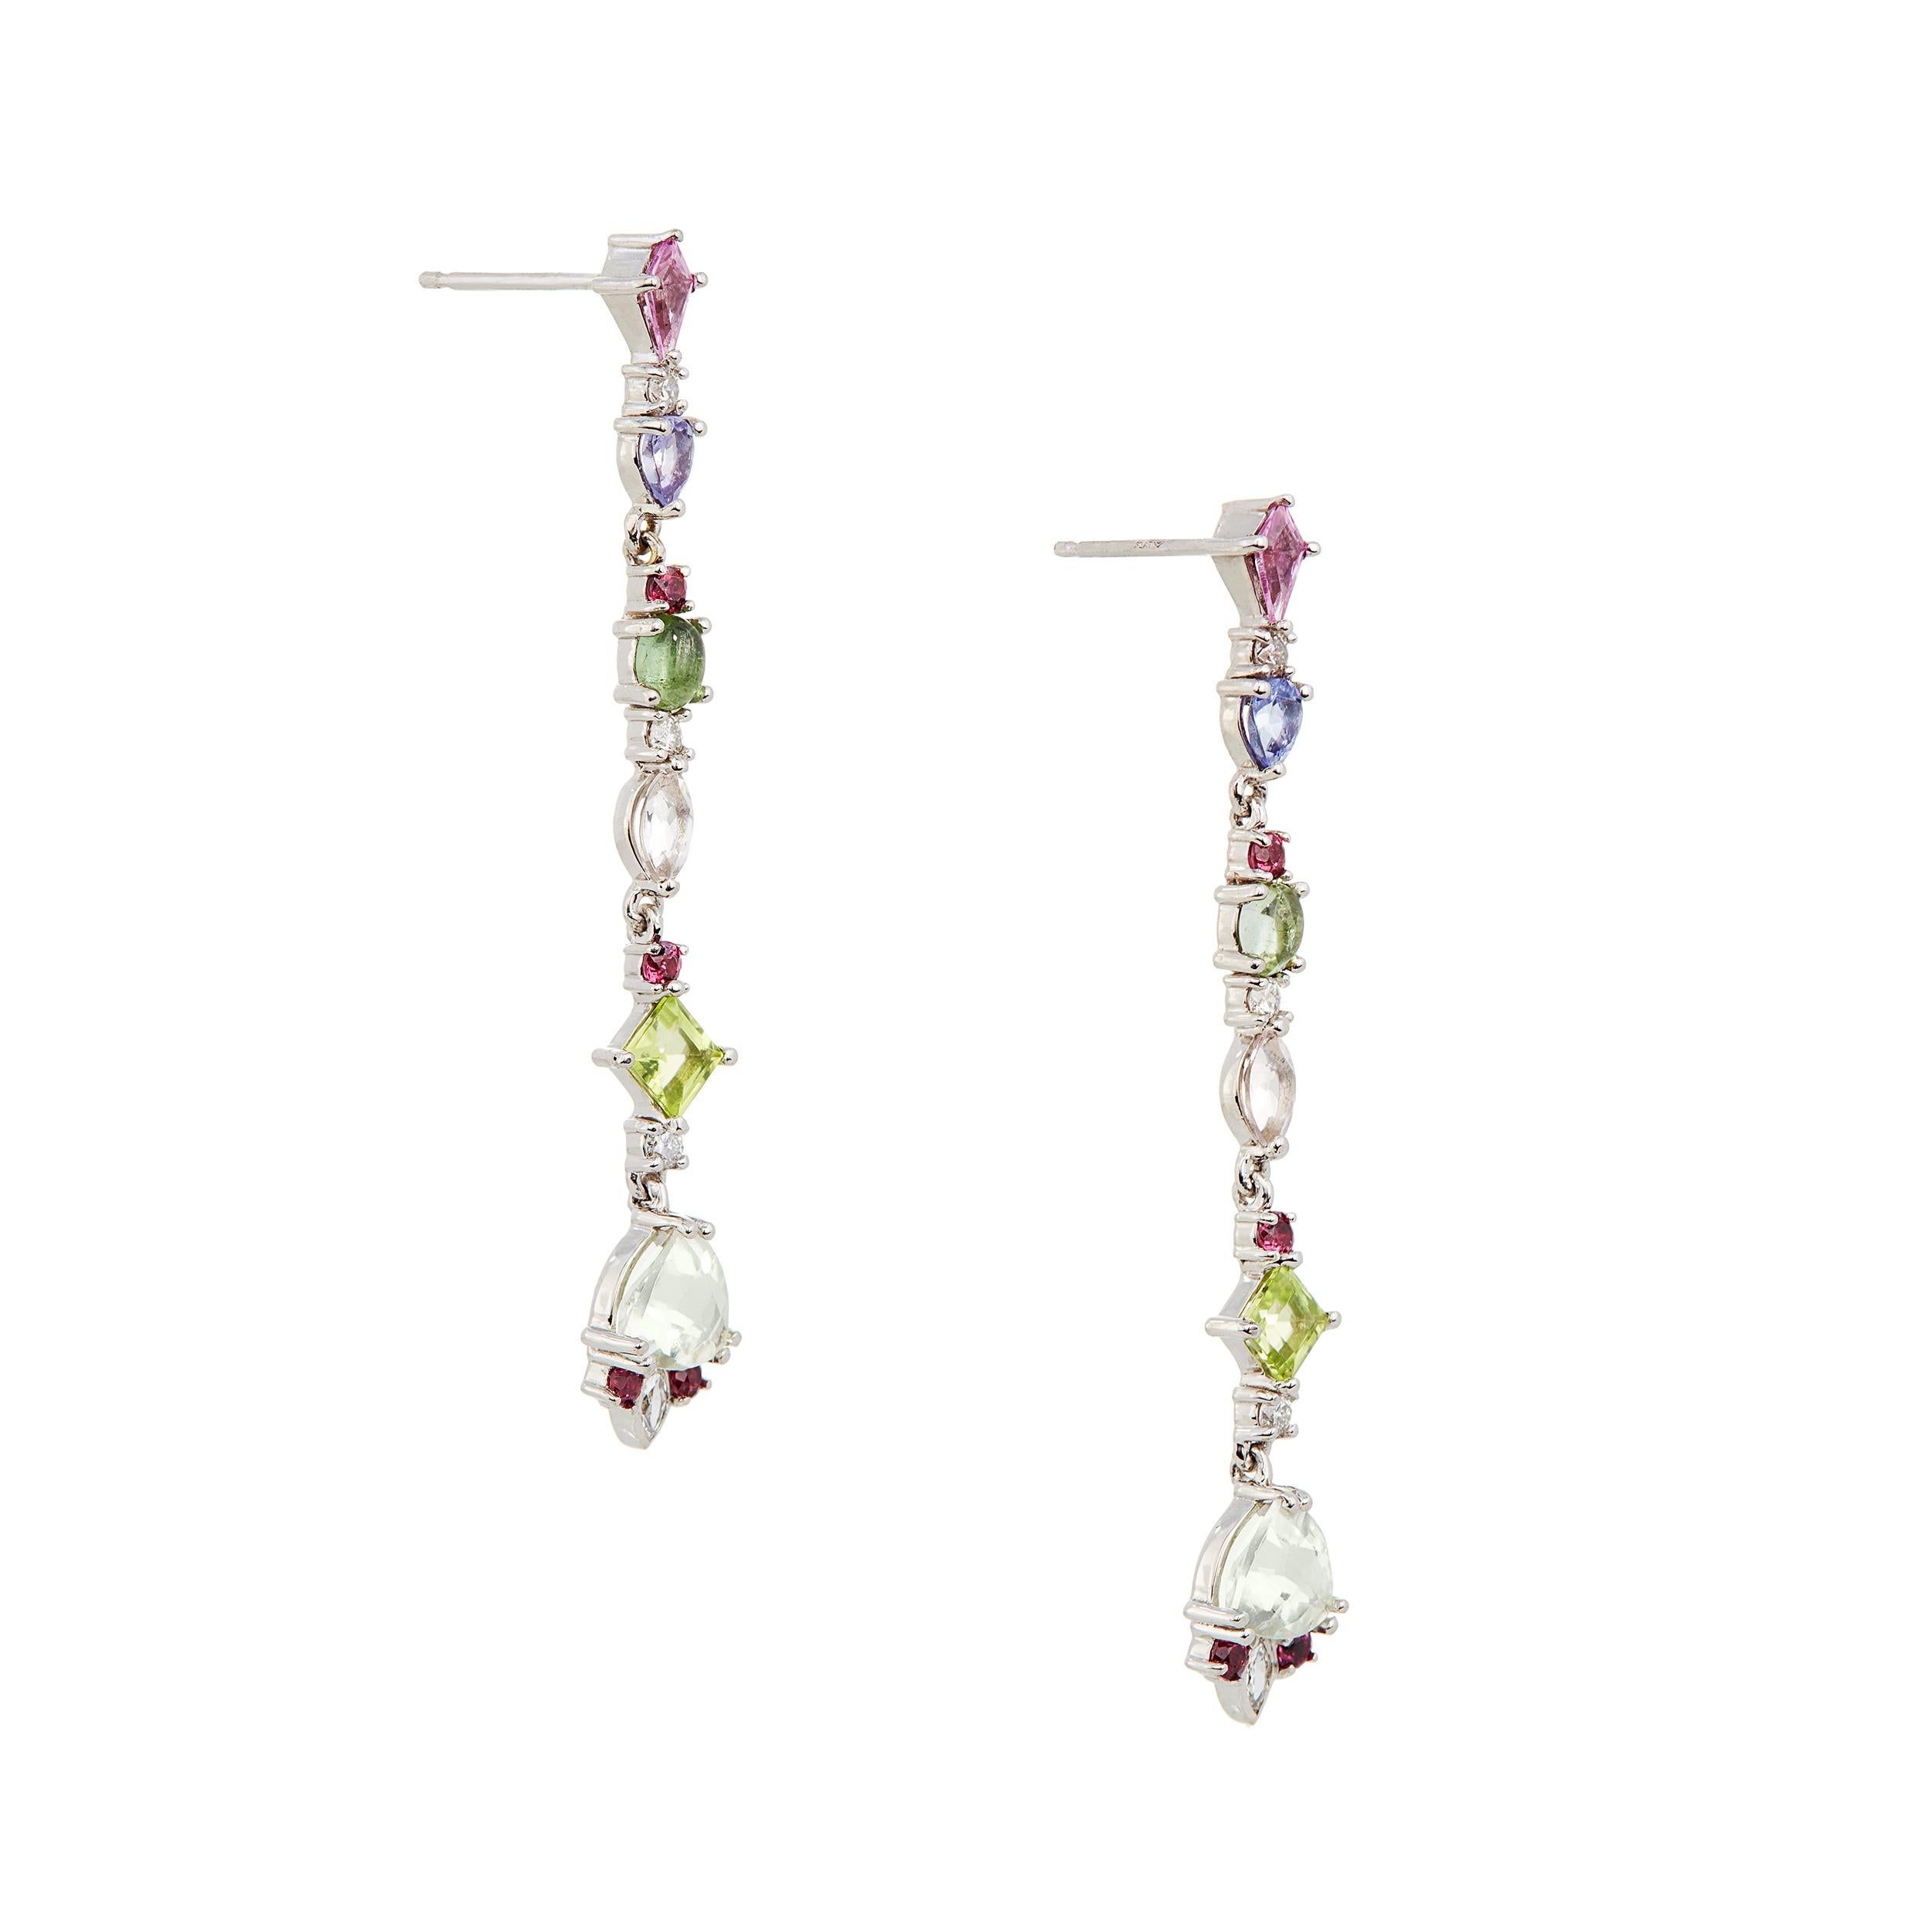 With the combination of 8 different colors of gemstones, there is a feeling of playfulness and fun, which is why we decided to call this set Clementine.  These earrings are light, airy and nothing short of joyful.  The long lines created by 8